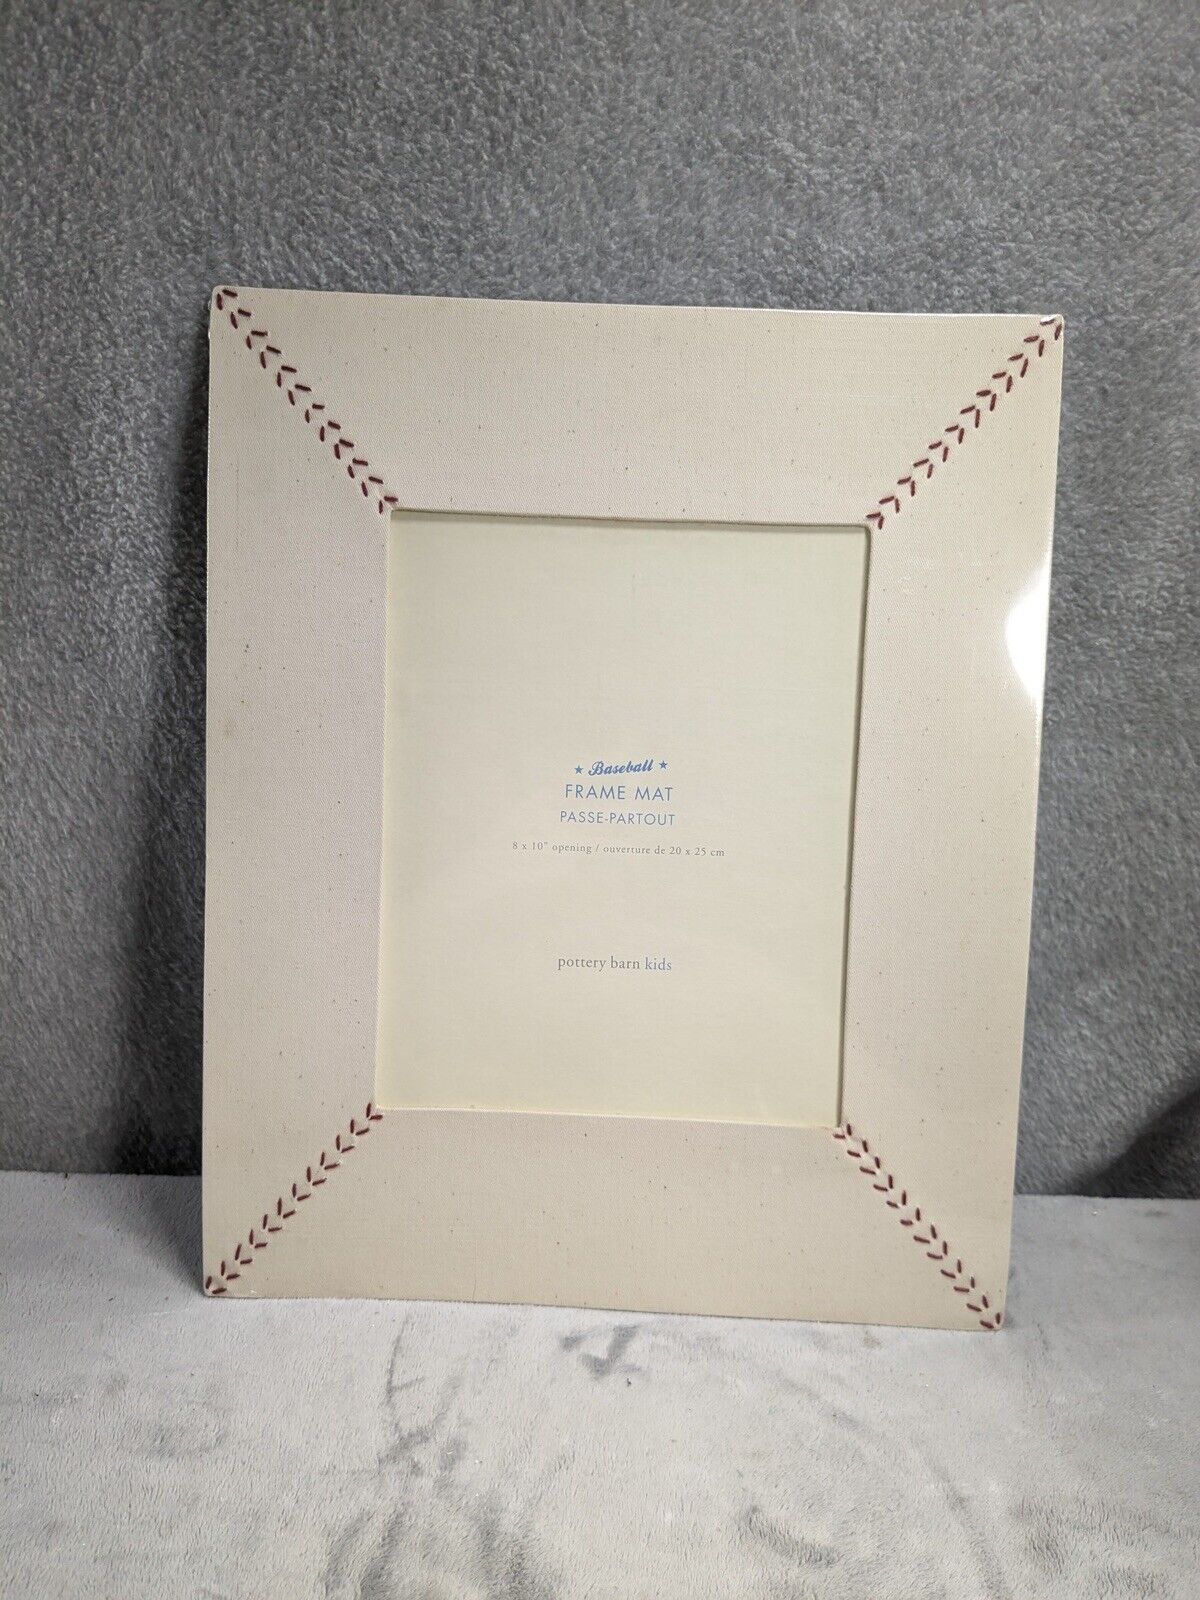 Pottery Barn Kids Picture Frame Mat - 8x10 Photo Opening - Vintage Baseball